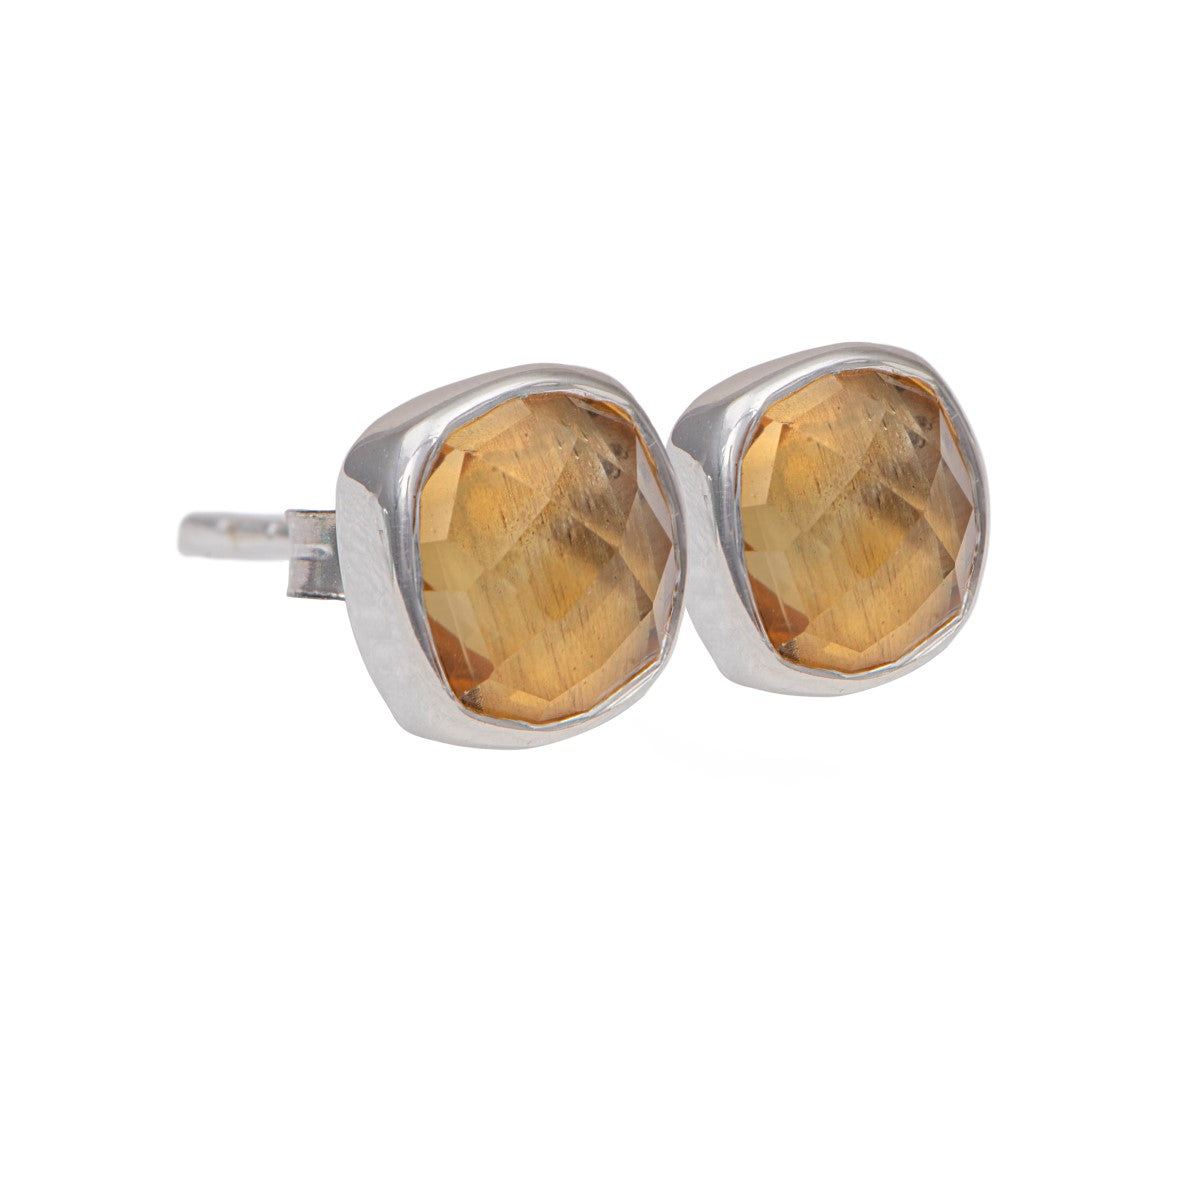 Faceted Square Citrine Gemstone Stud Earrings in Sterling Silver